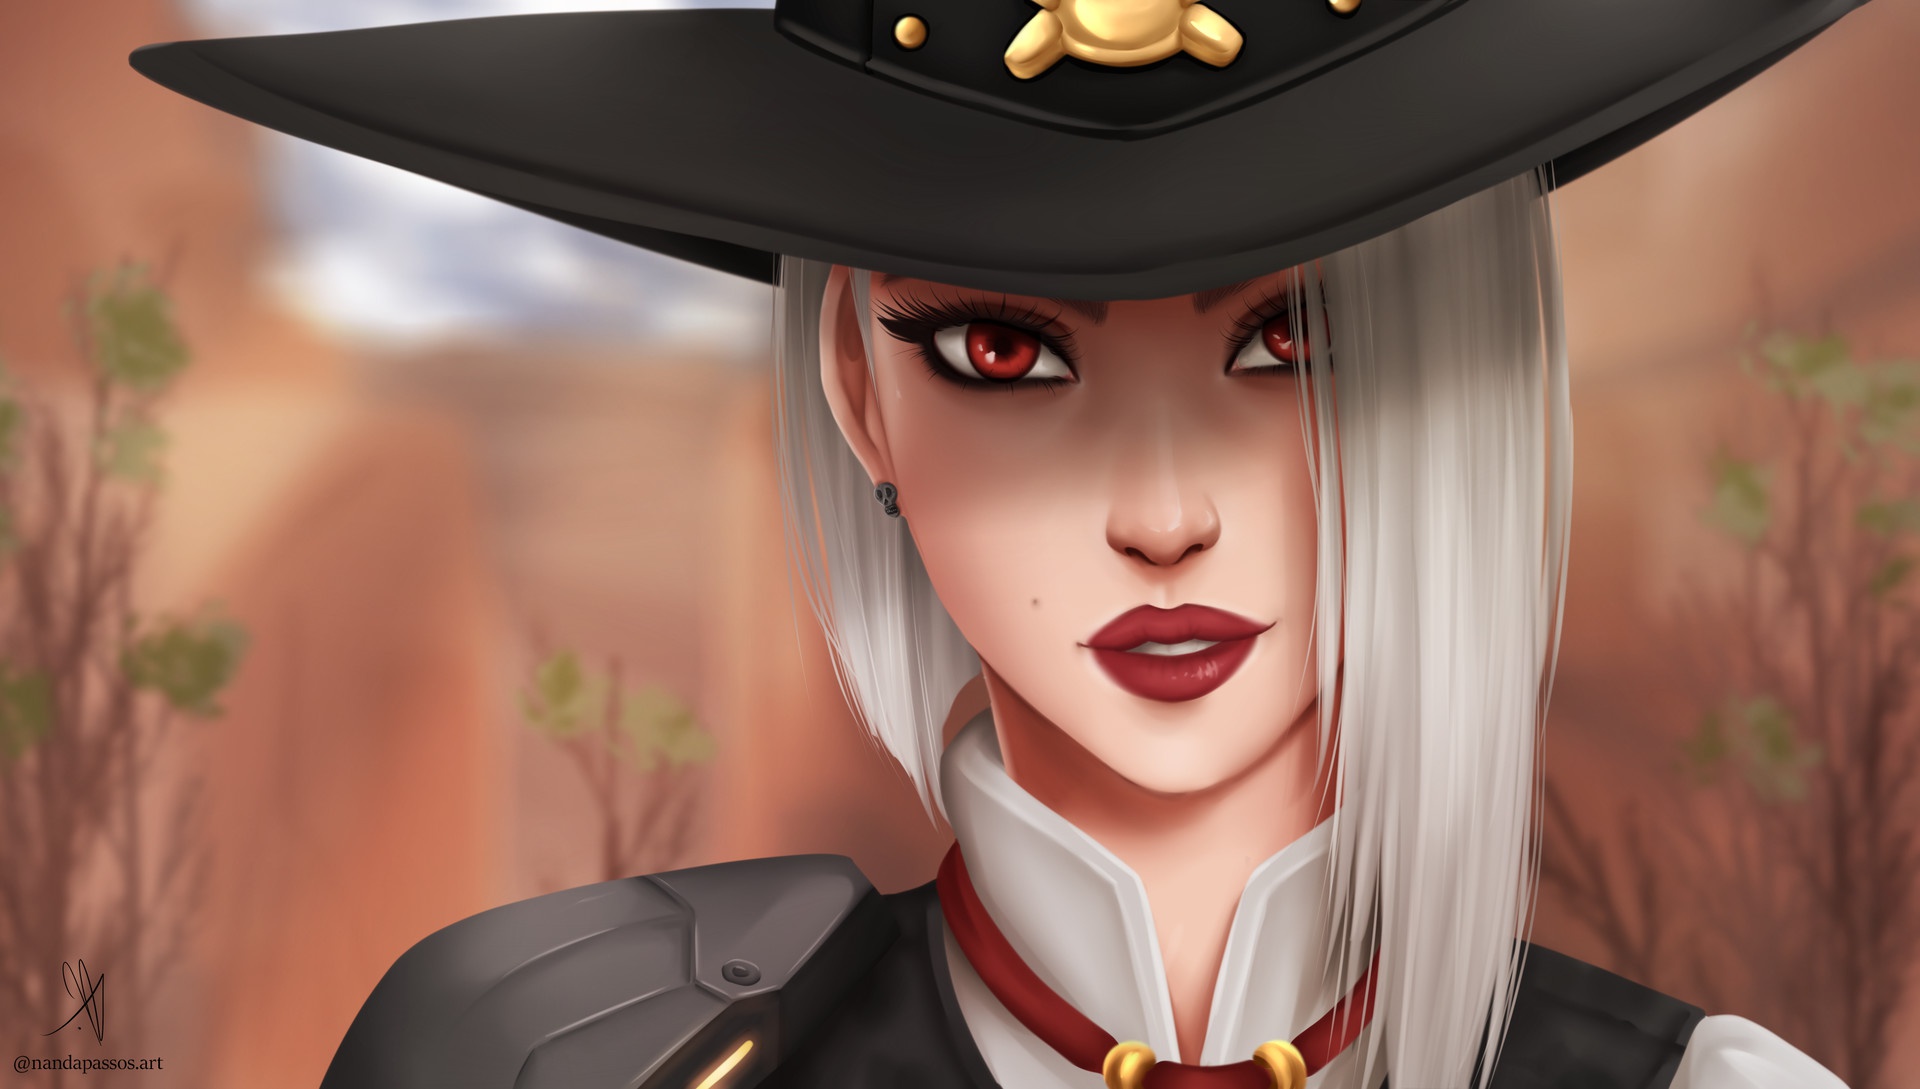 1280x1024 Ashe Overwatch Girl 1280x1024 Resolution Hd 4k Wallpapers Images Backgrounds Photos And Pictures